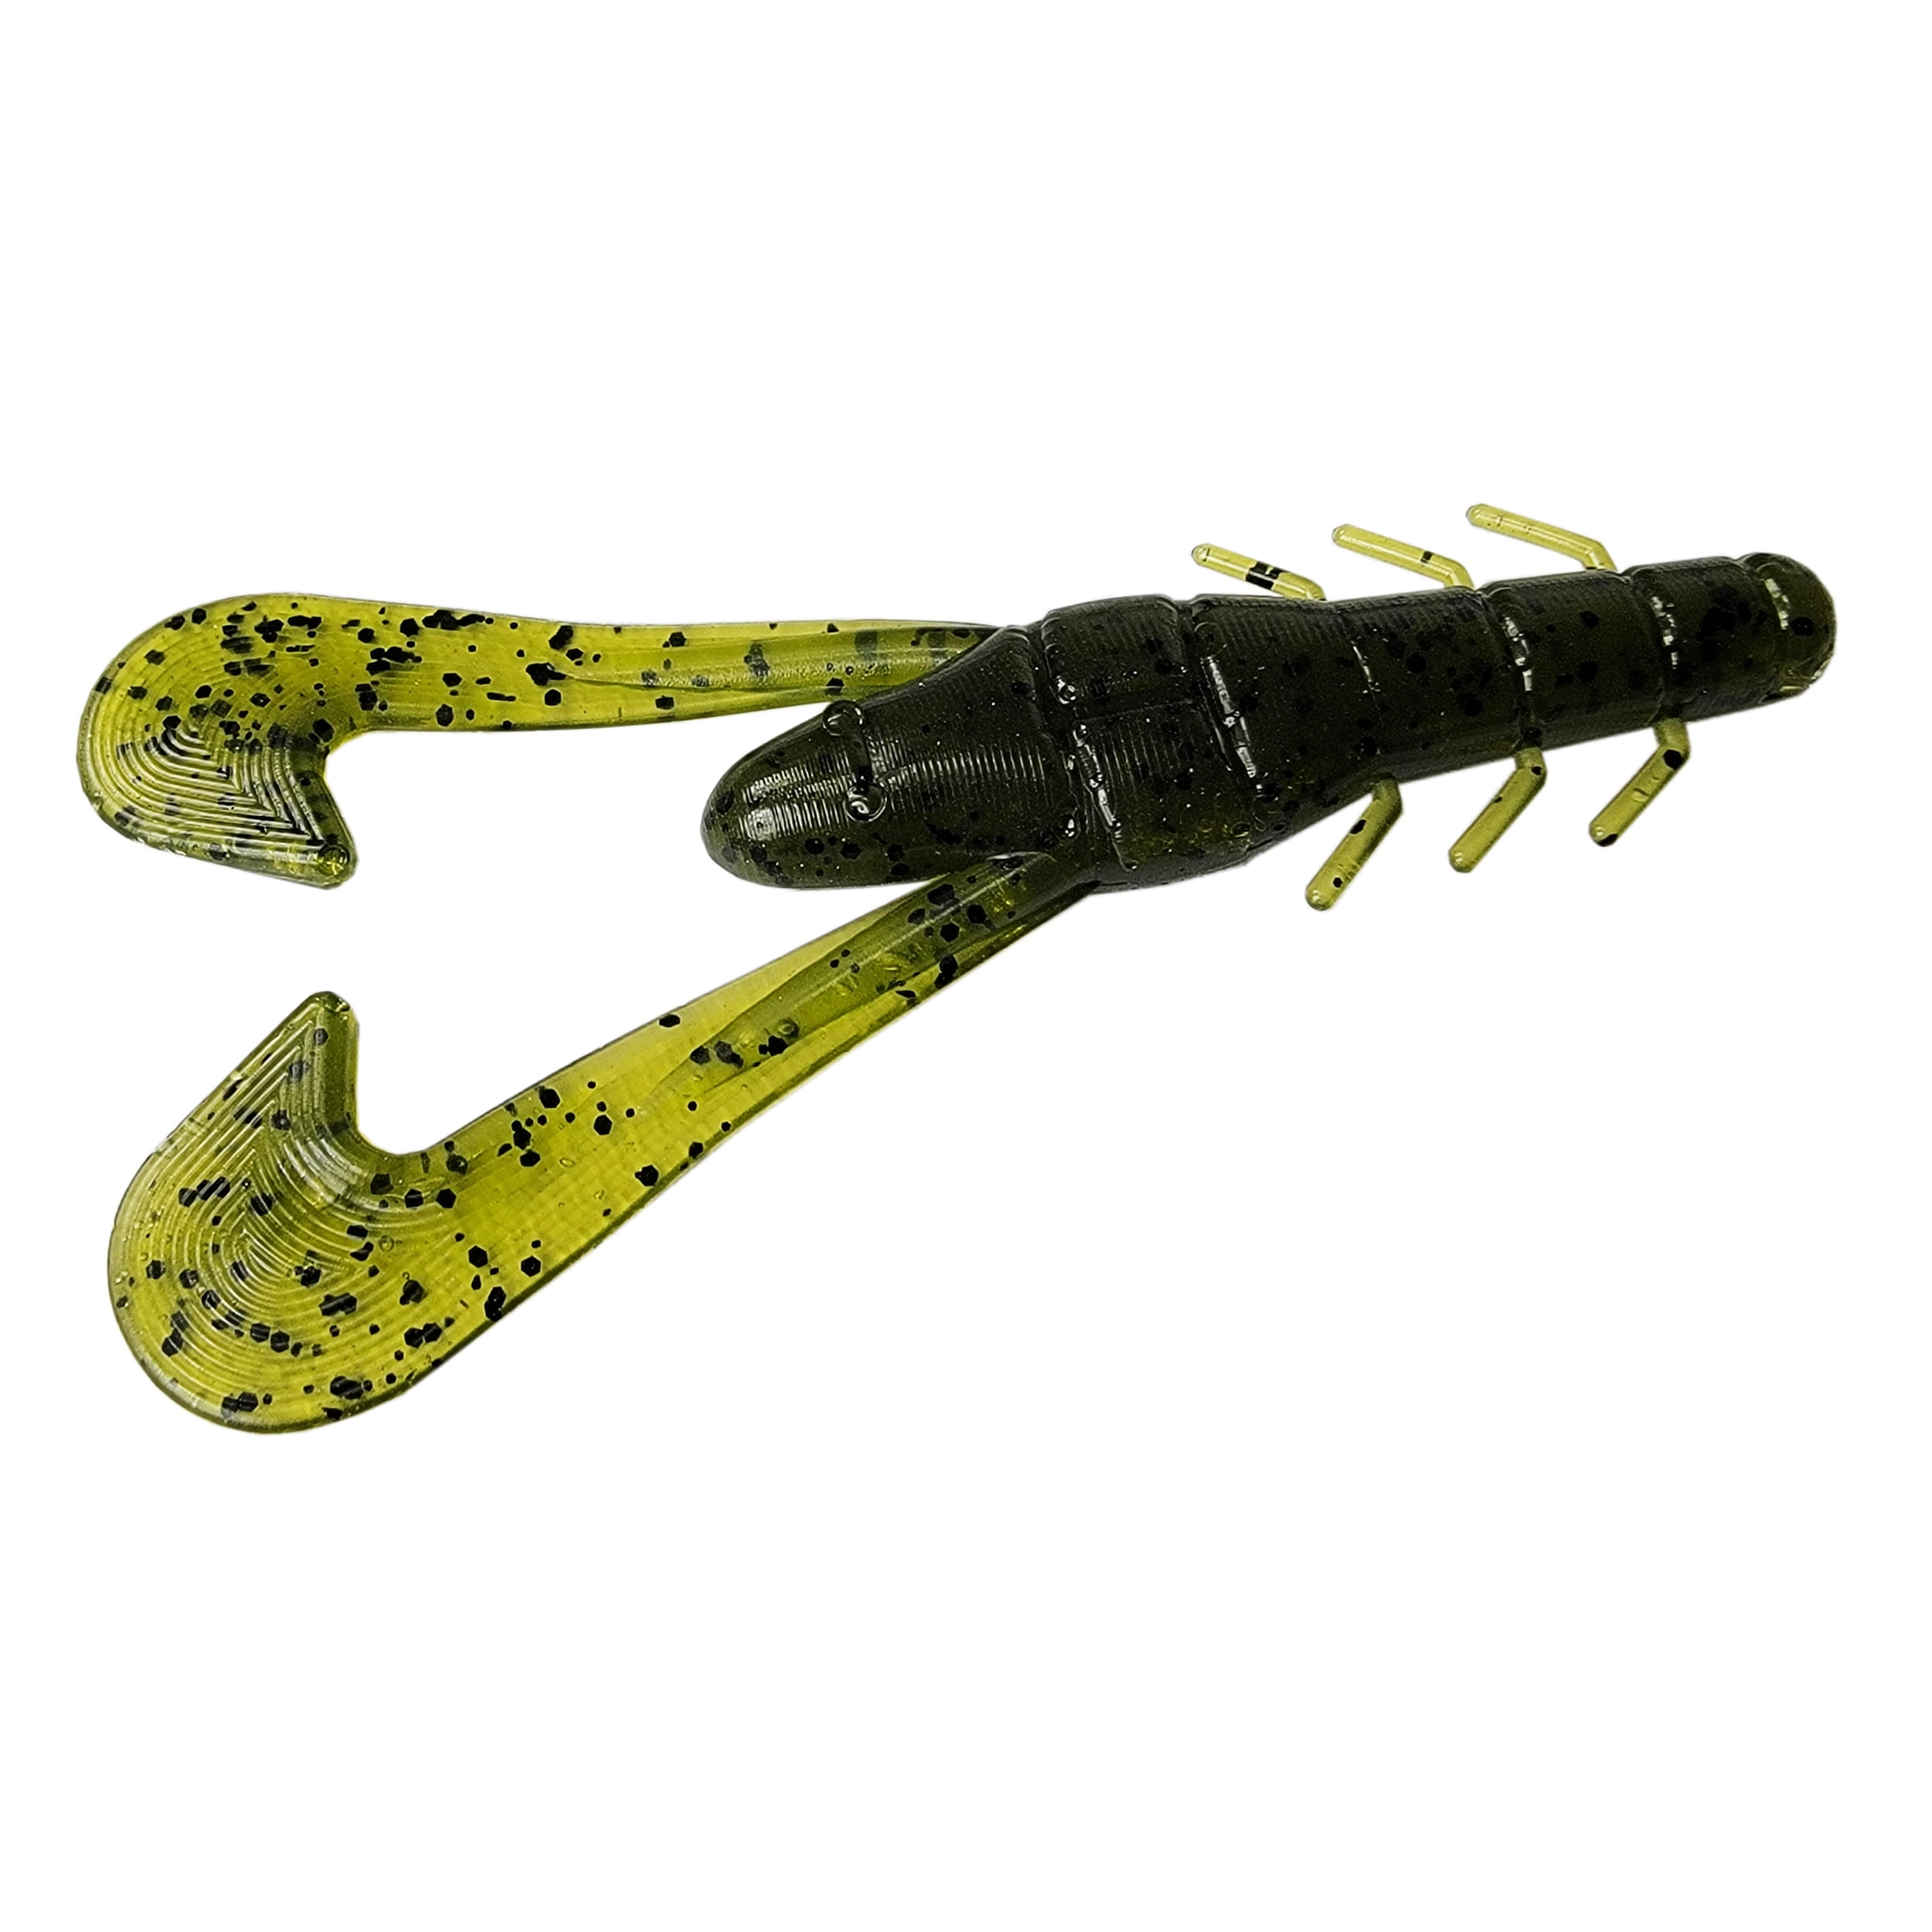 Tackle HD 8-Pack Speed Bug Bass Fishing Lure, 5-Inch Craw Fishing